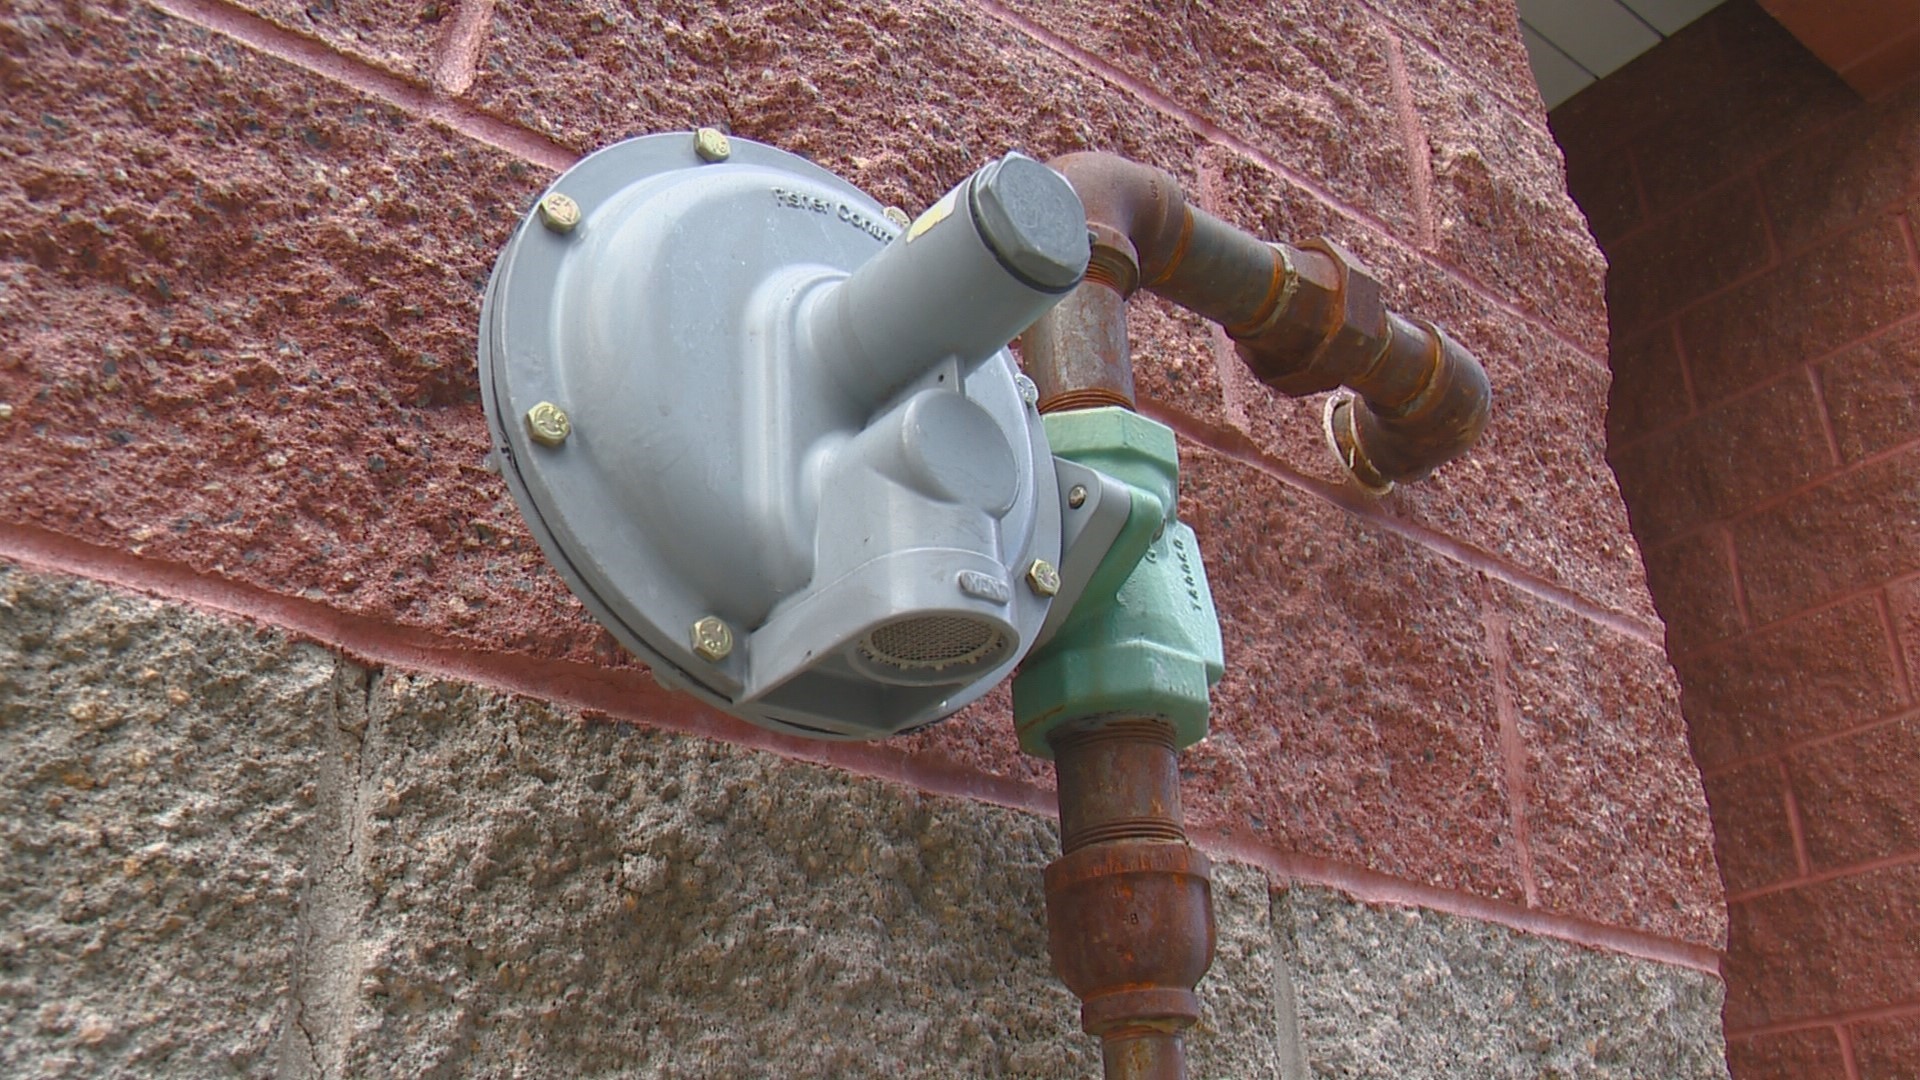 The McCall Fire District said over the last 10 years, it has responded to 136 propane-related emergencies and it hopes these new regulations can change that.